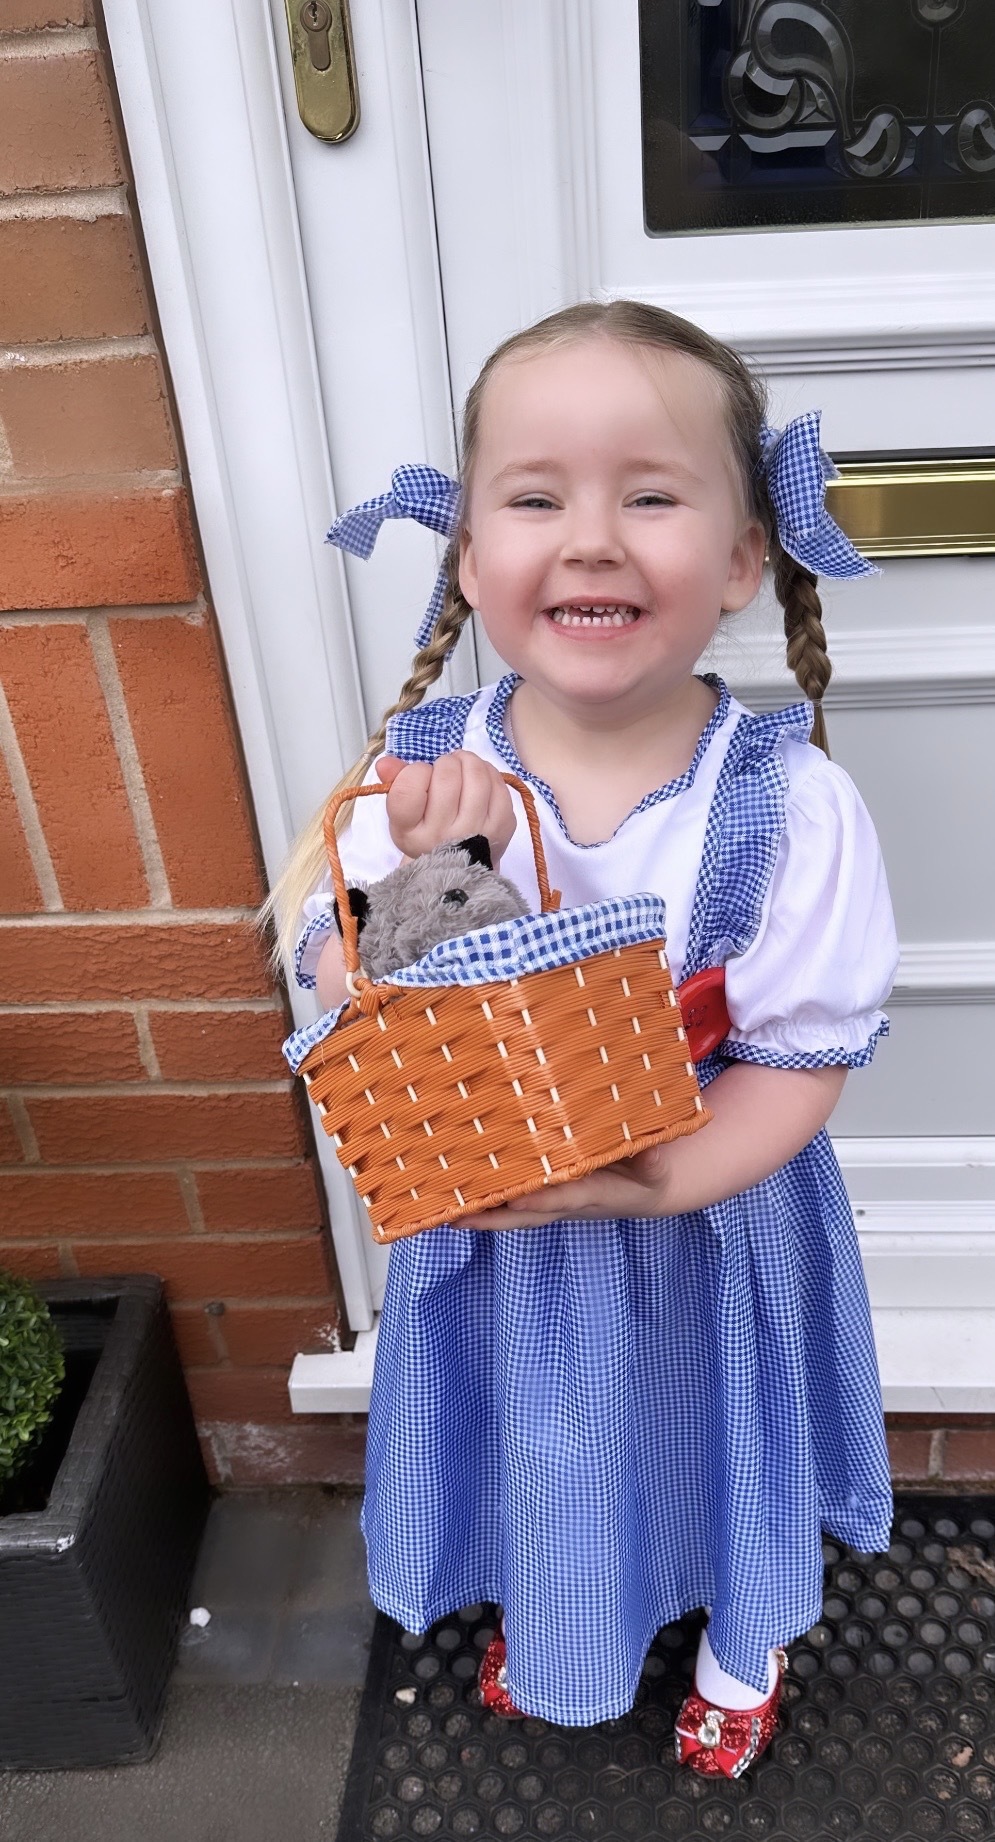 Three-year-old Paislee Trice-Sides as Dorothy from The Wizard of Oz